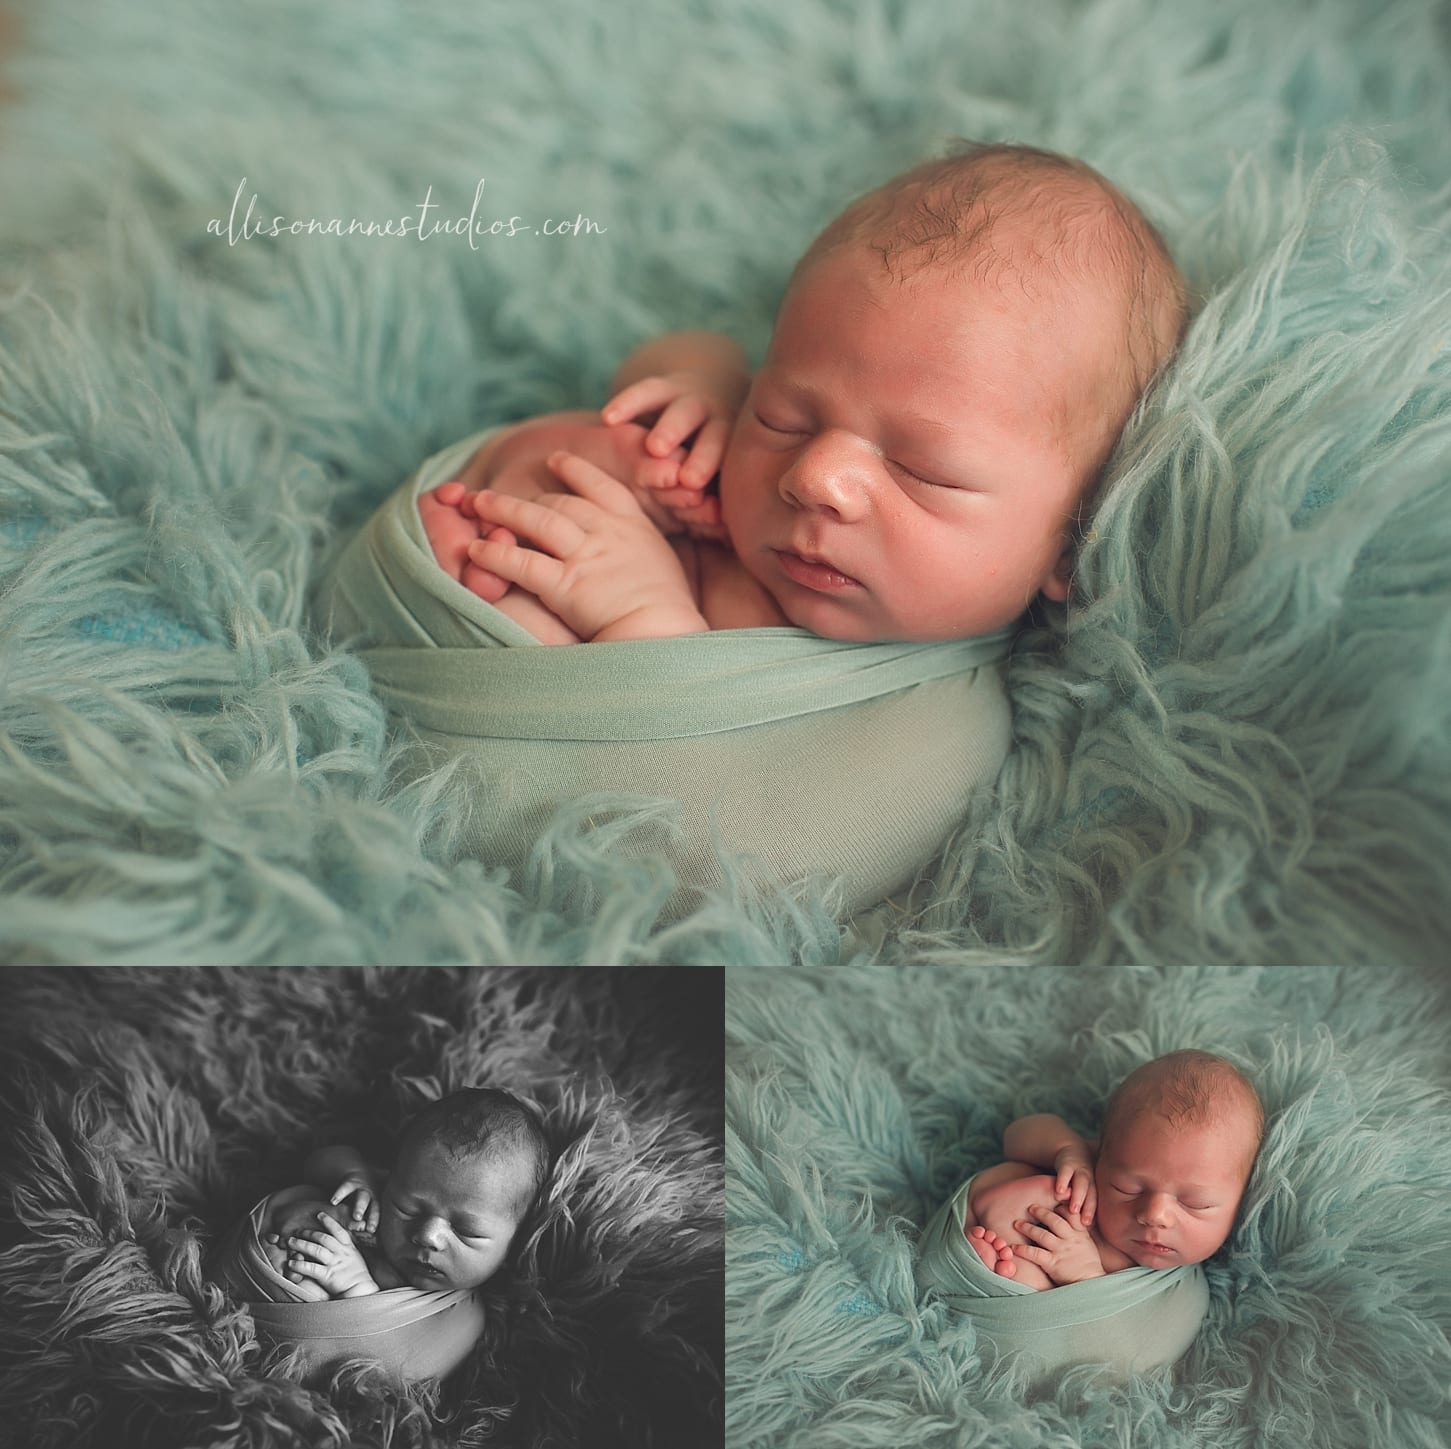 Christopher, baby biceps, SOILD training, friends, newborn sessions, best photographer in south jersey, Allison Gallagher, love, Hammonton, AllisonAnne Studios, local, small business, studio sessions, scrabble